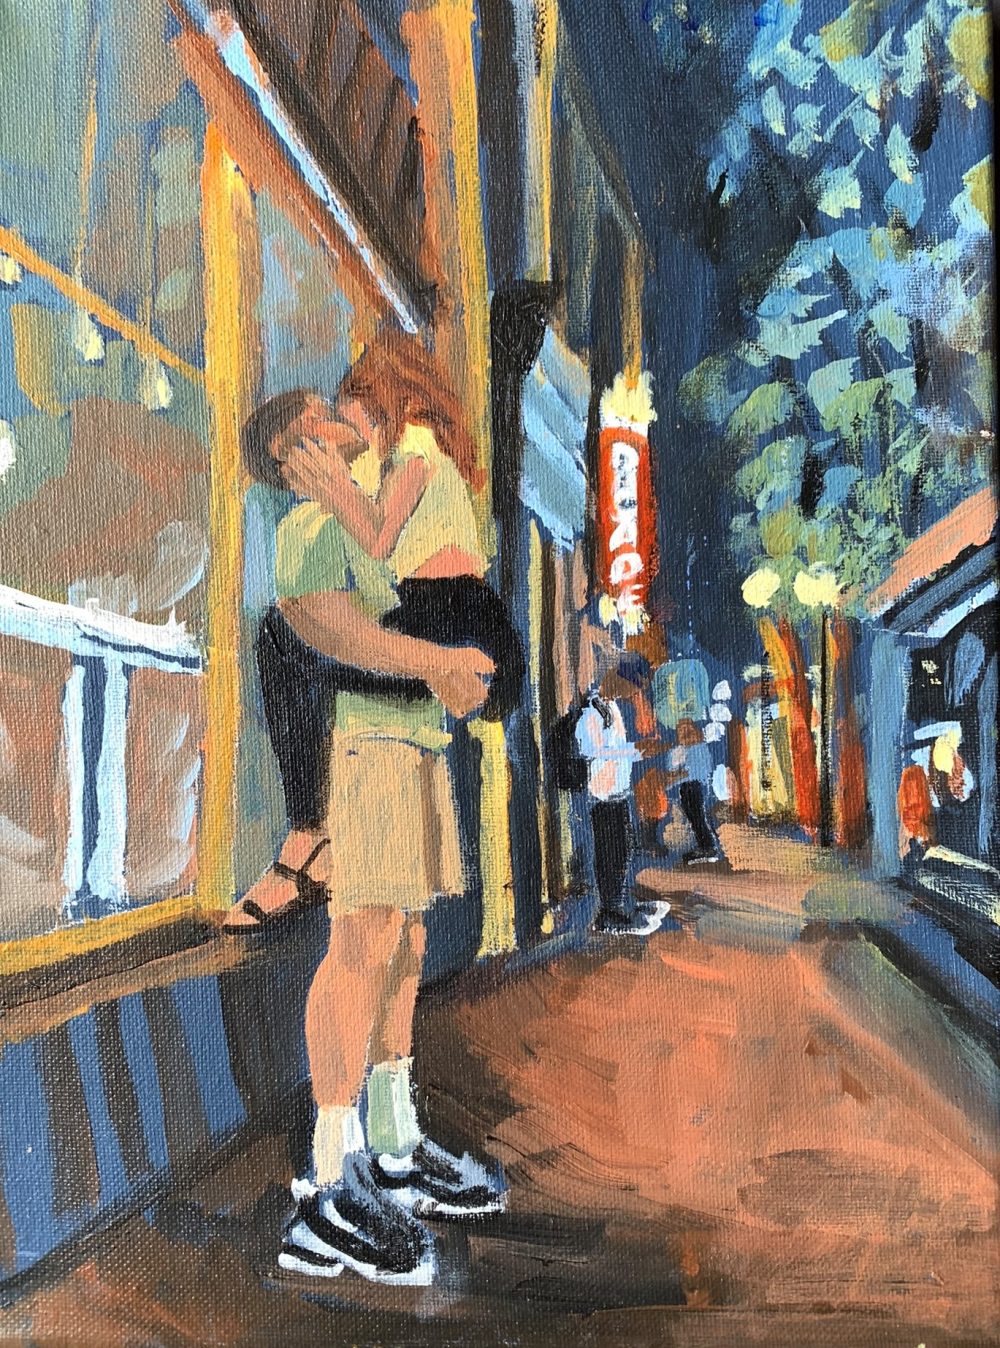 A young man holds and kisses a young woman in downtown Portland at night.